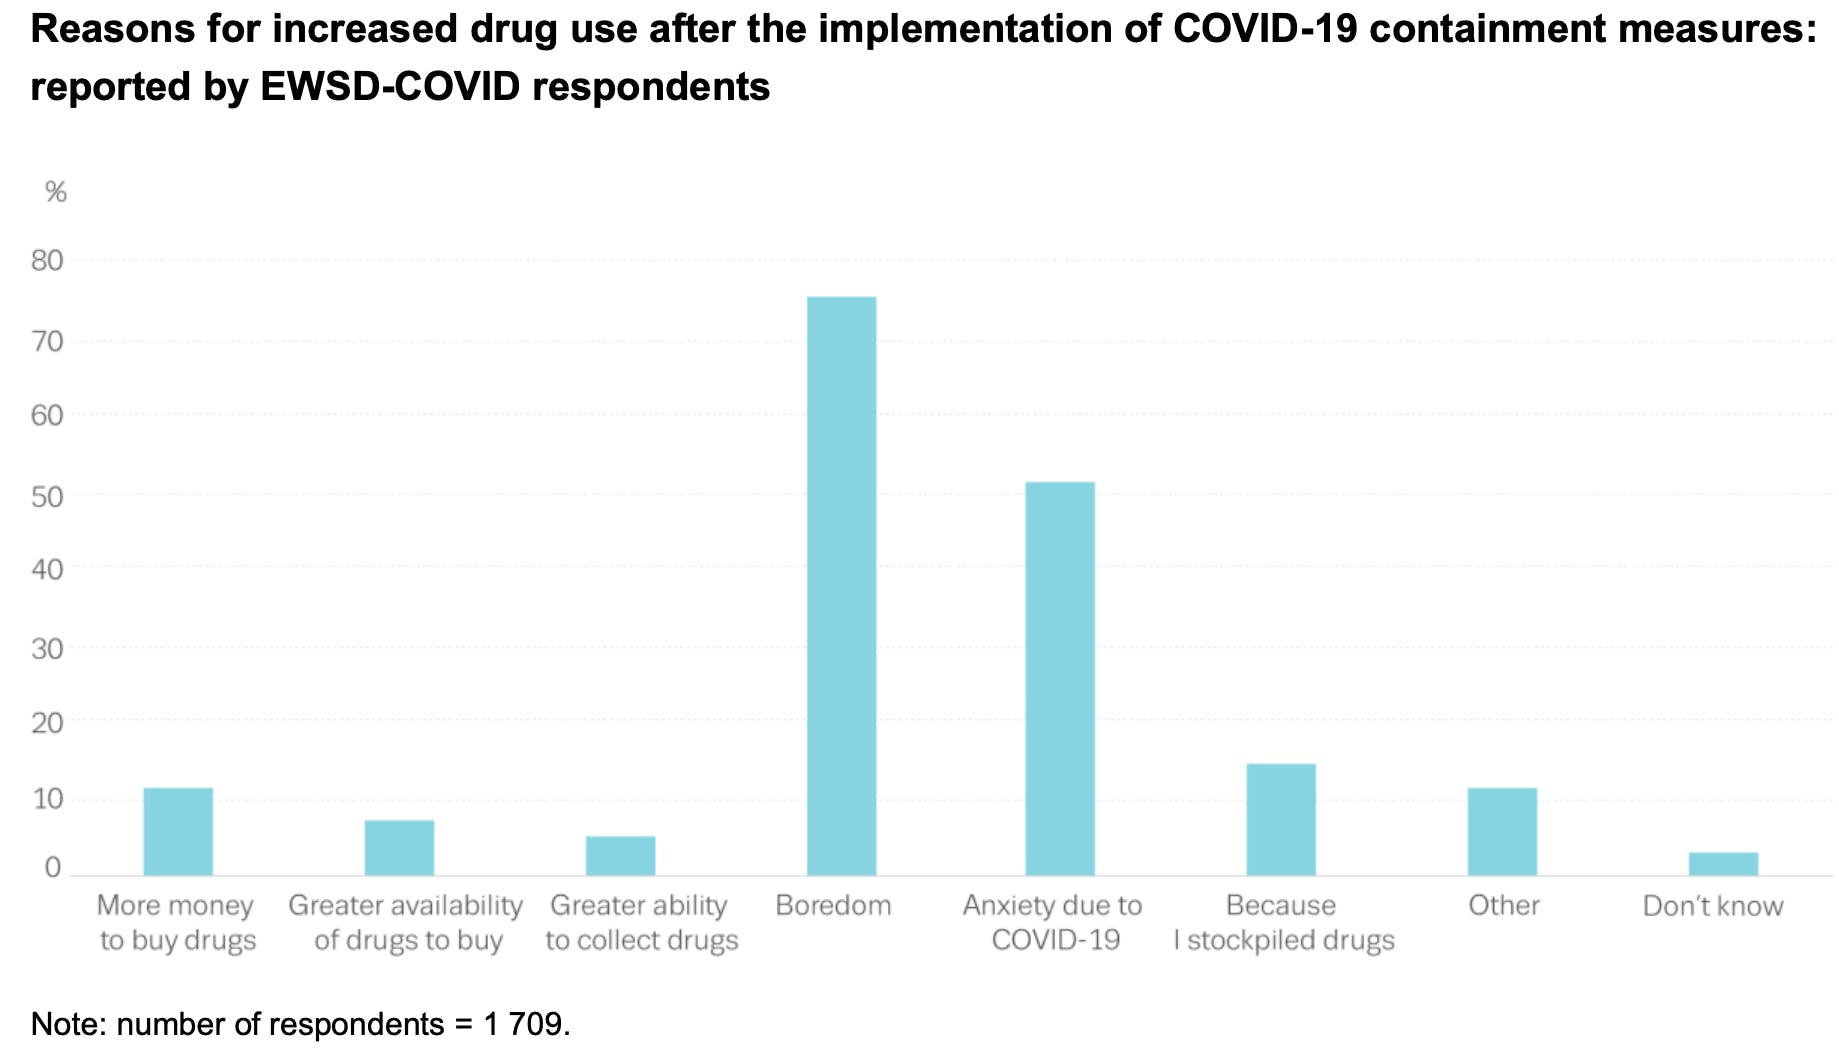 A chart showing reasons for changed drug habits during the COVID-19 pandemic, with "boredom" being the most frequent response